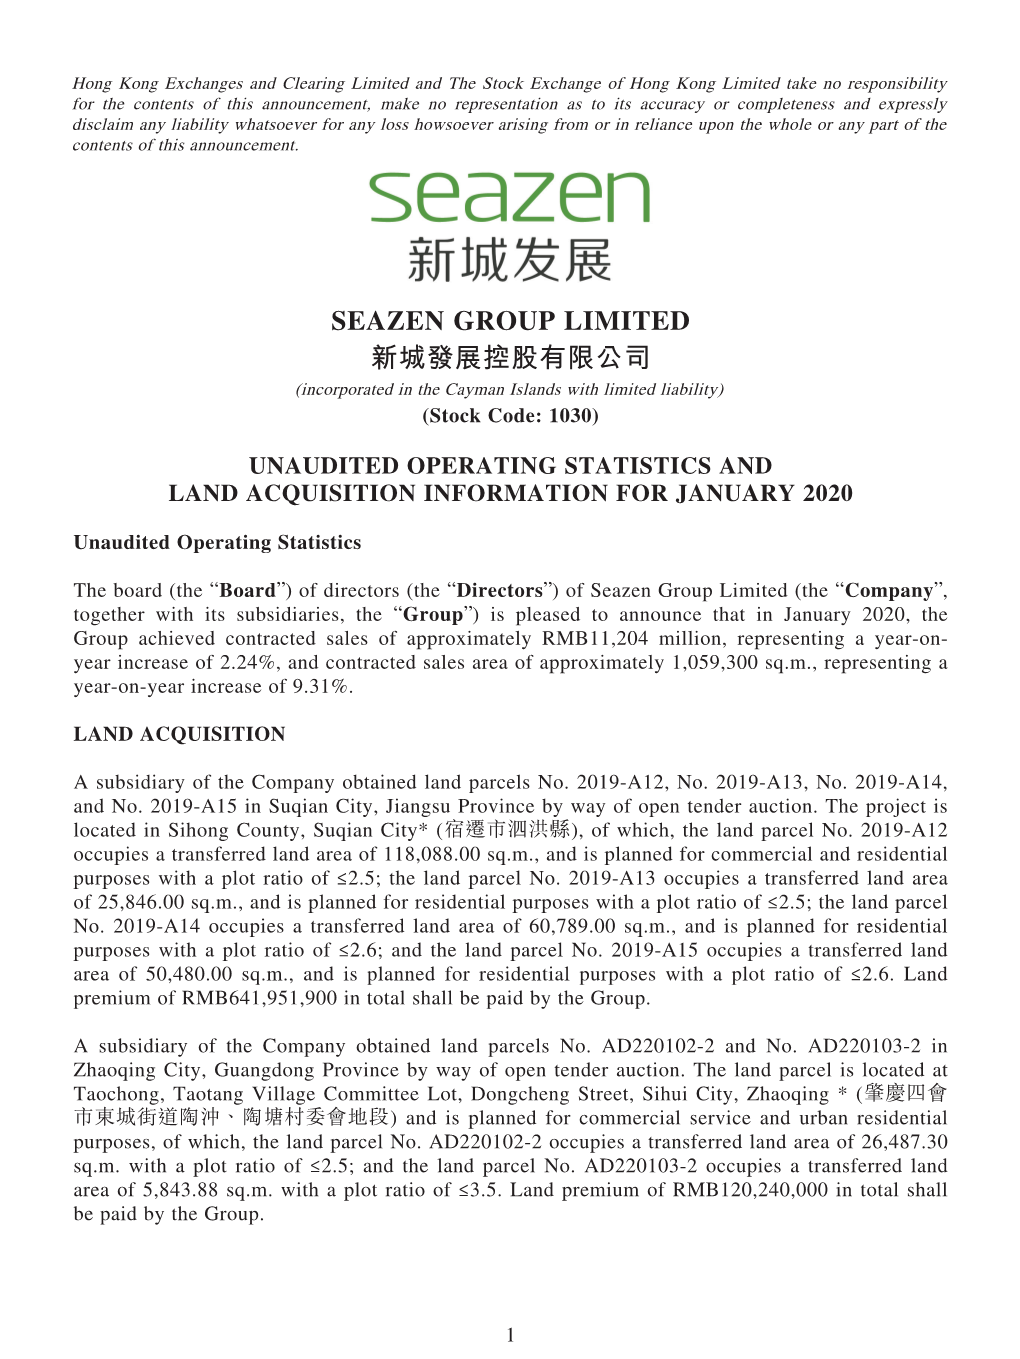 SEAZEN GROUP LIMITED 新城發展控股有限公司 (Incorporated in the Cayman Islands with Limited Liability) (Stock Code: 1030)